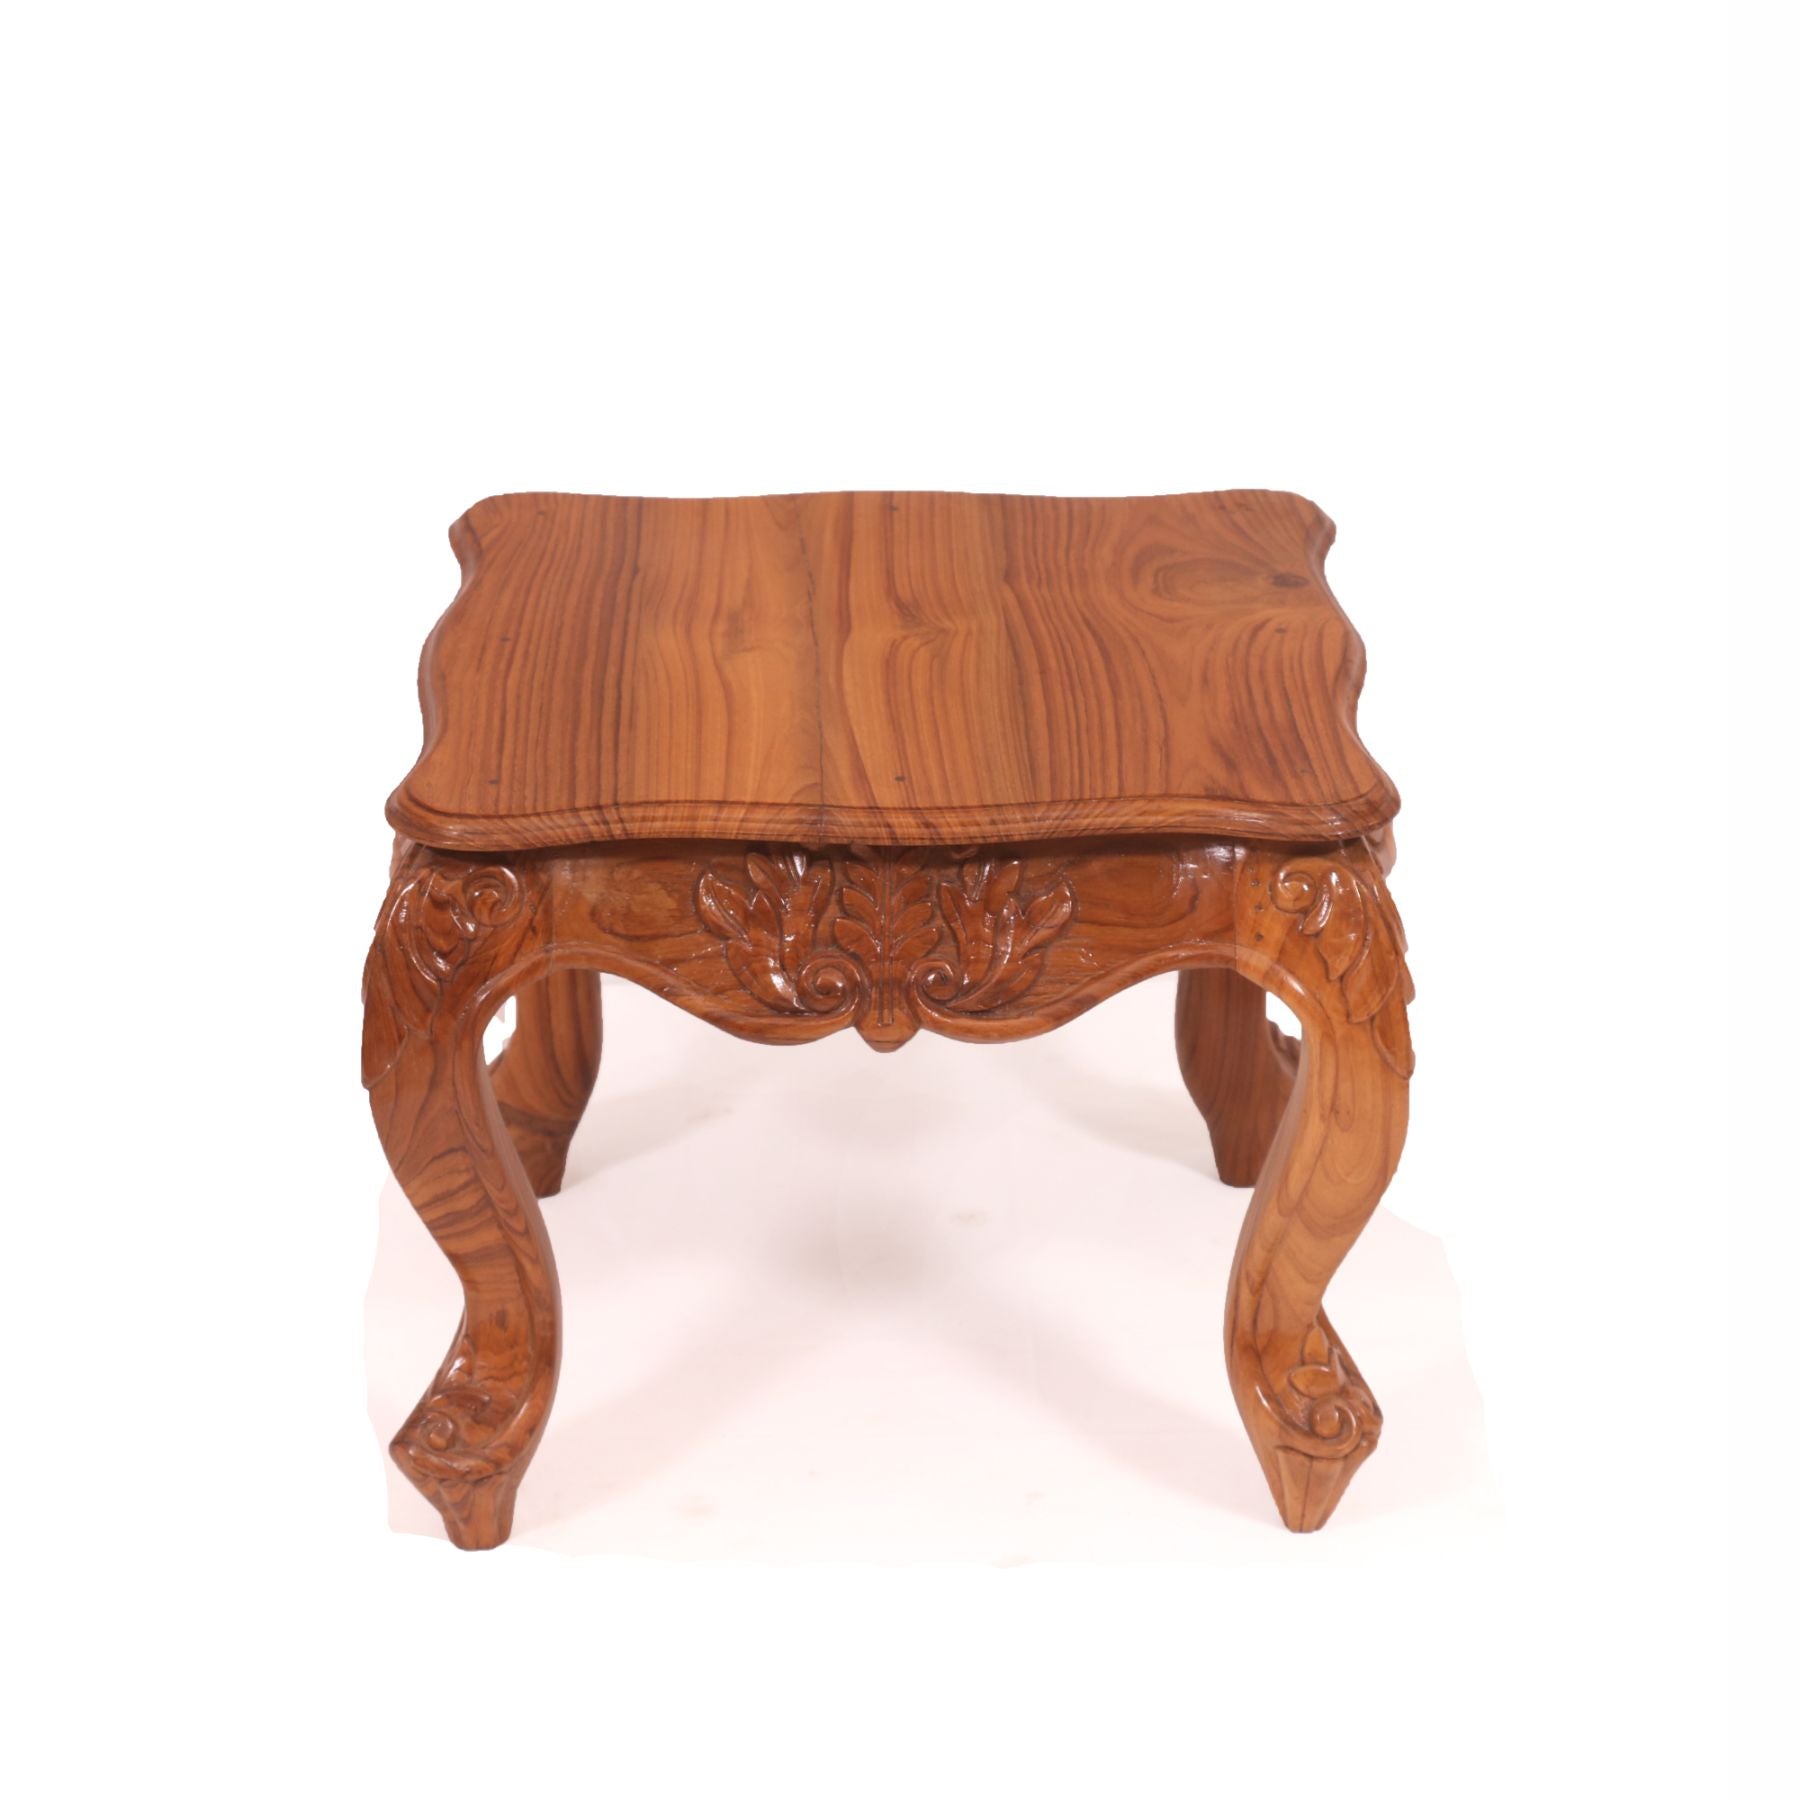 Compact Carving Teak Wood Coffee Table Small Coffee Table